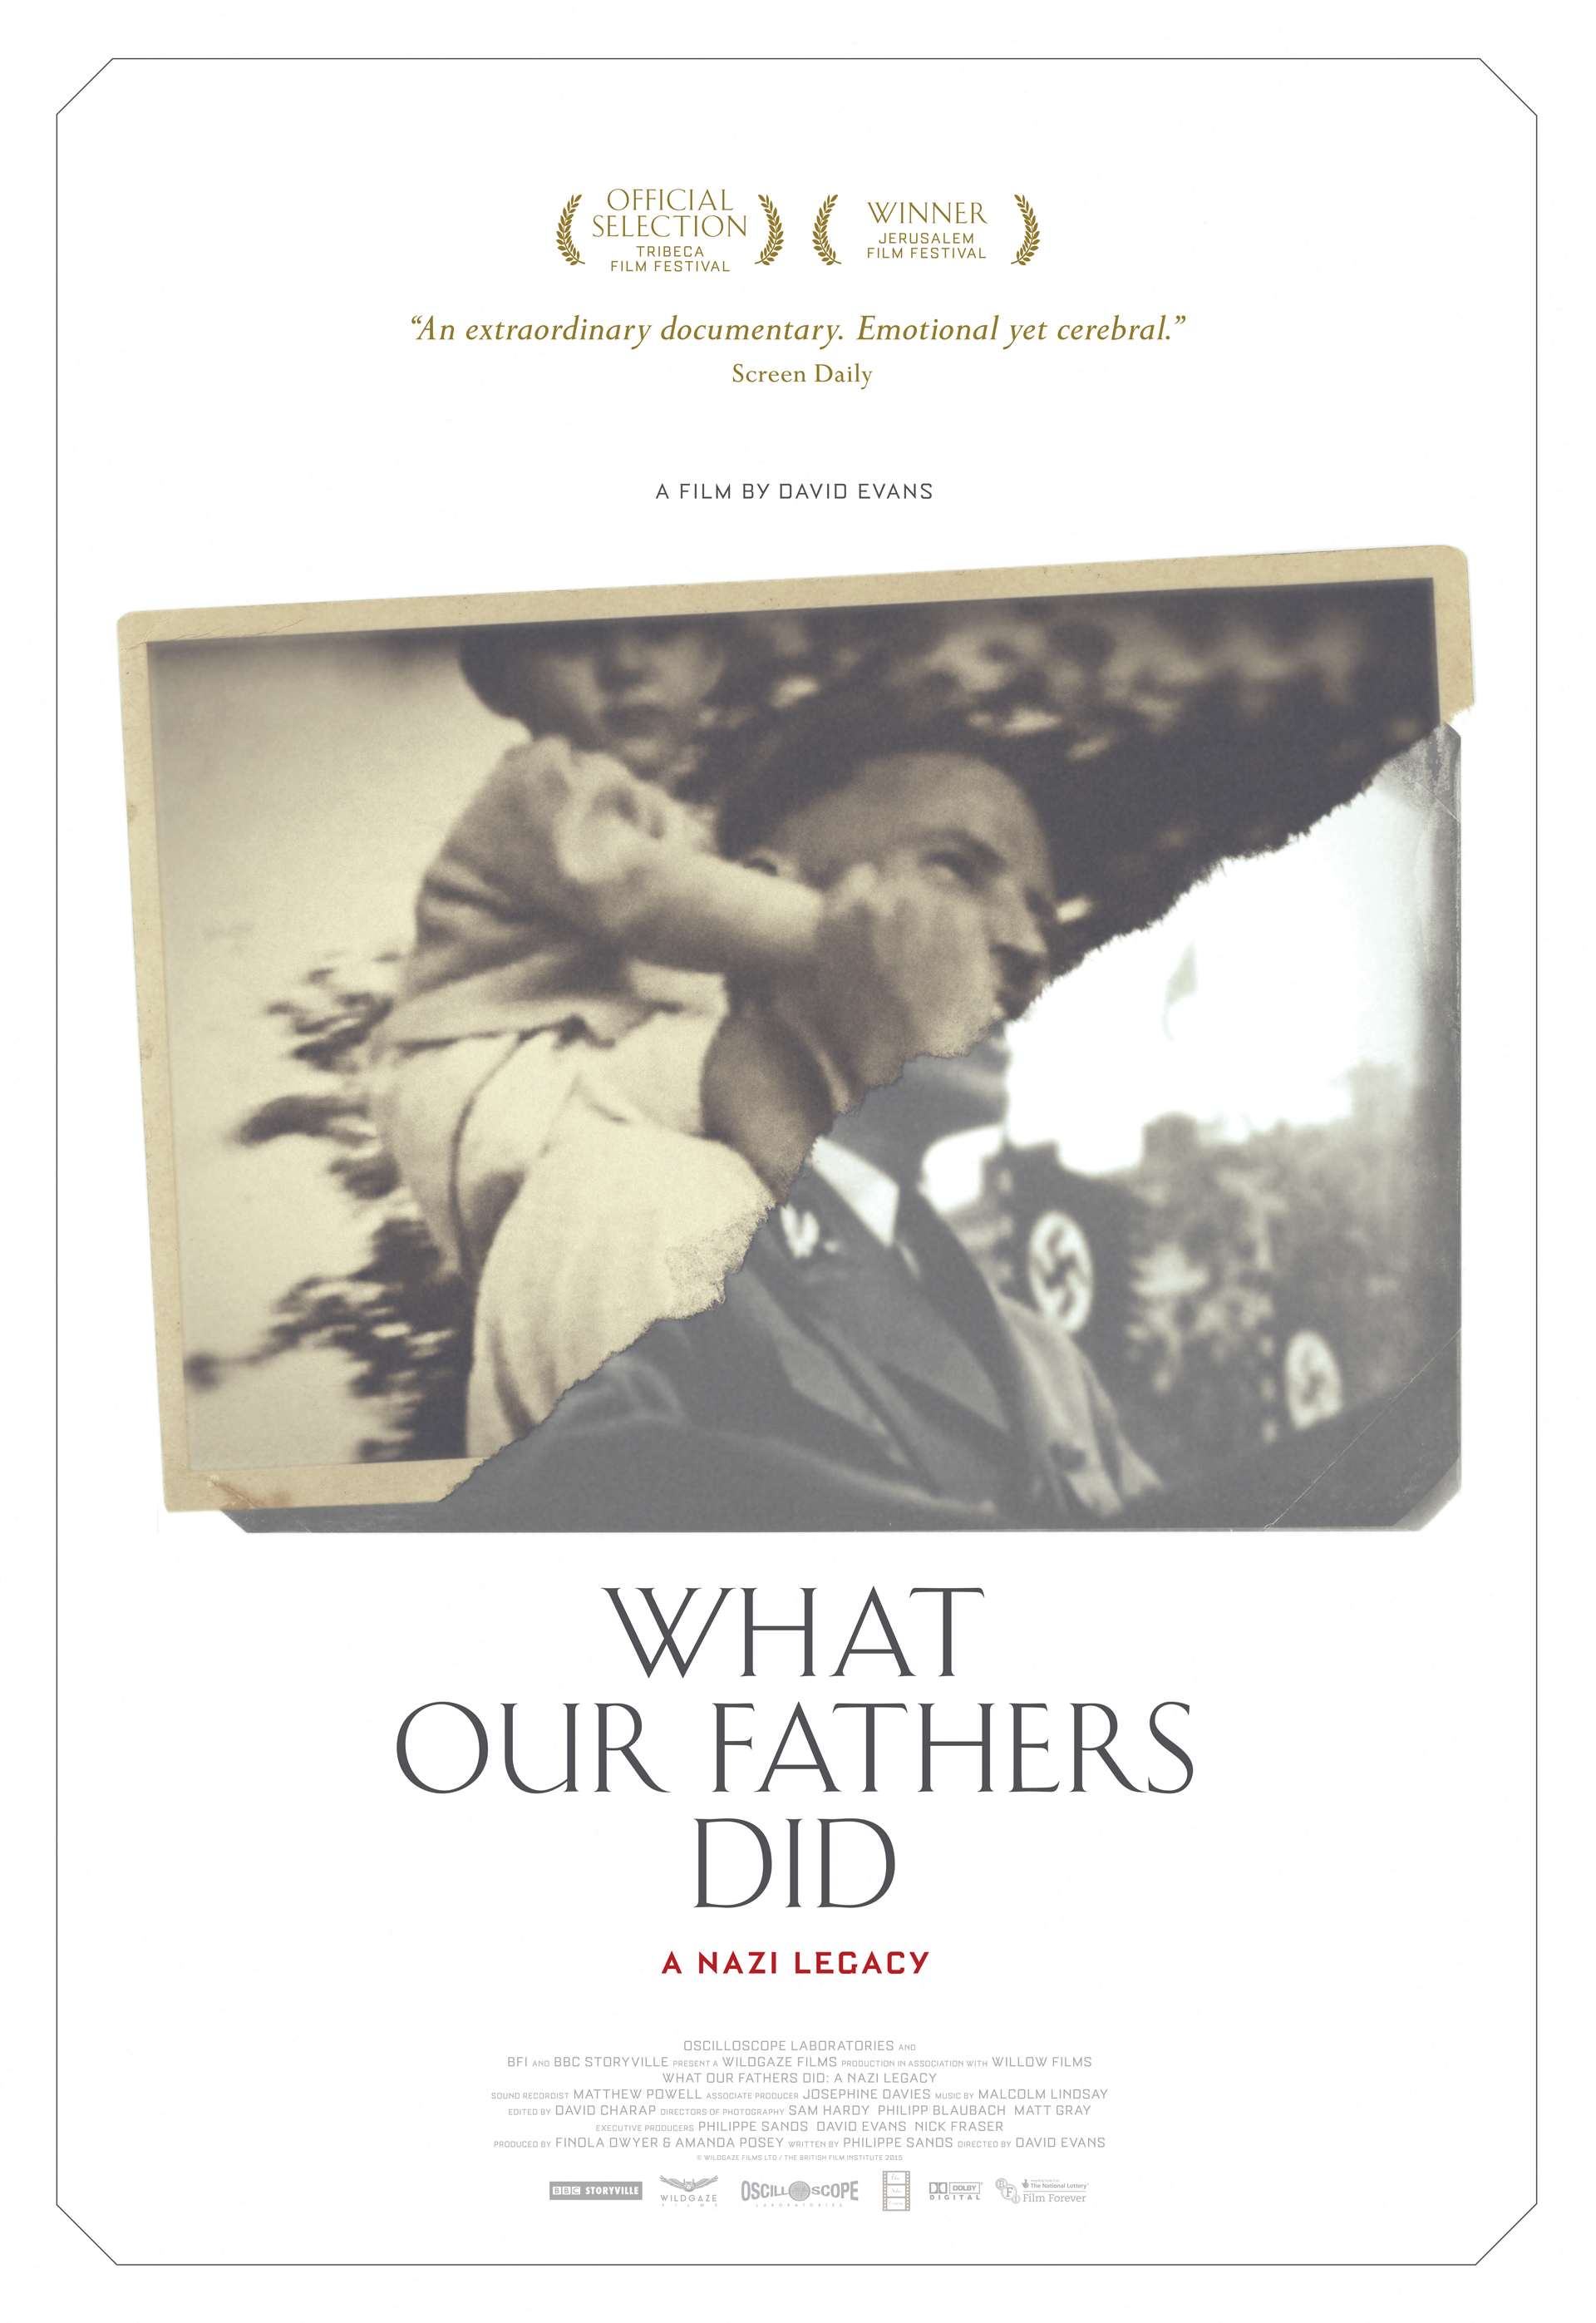 Nonton film What our Fathers Did a Nazi Legacy layarkaca21 indoxx1 ganool online streaming terbaru